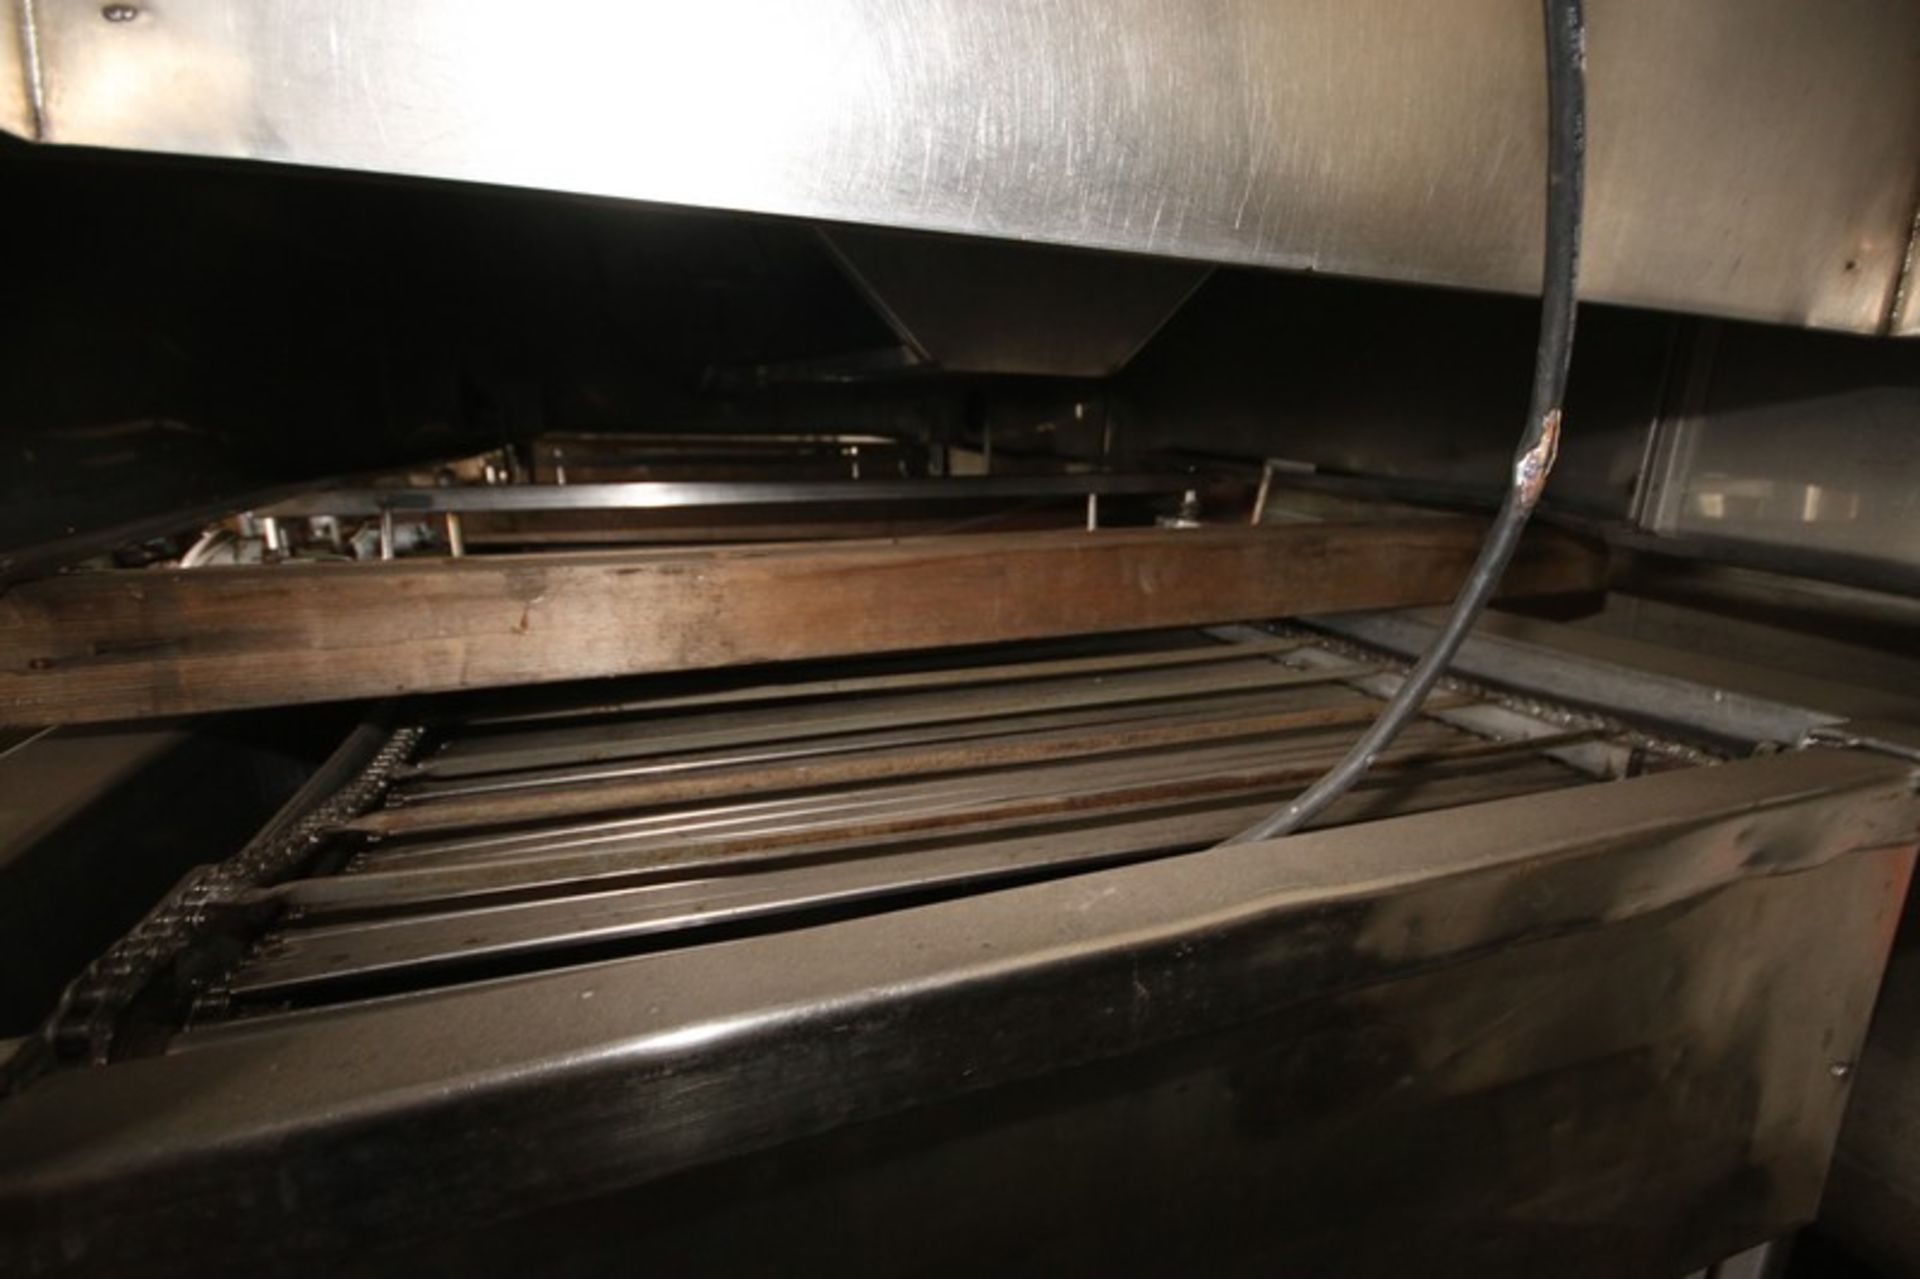 Higgs S/S Conveyor Bakery Fryer,Natural Gas Heated, 14' L x 54"W, Includes Exhaust Hood & Control - Image 3 of 11